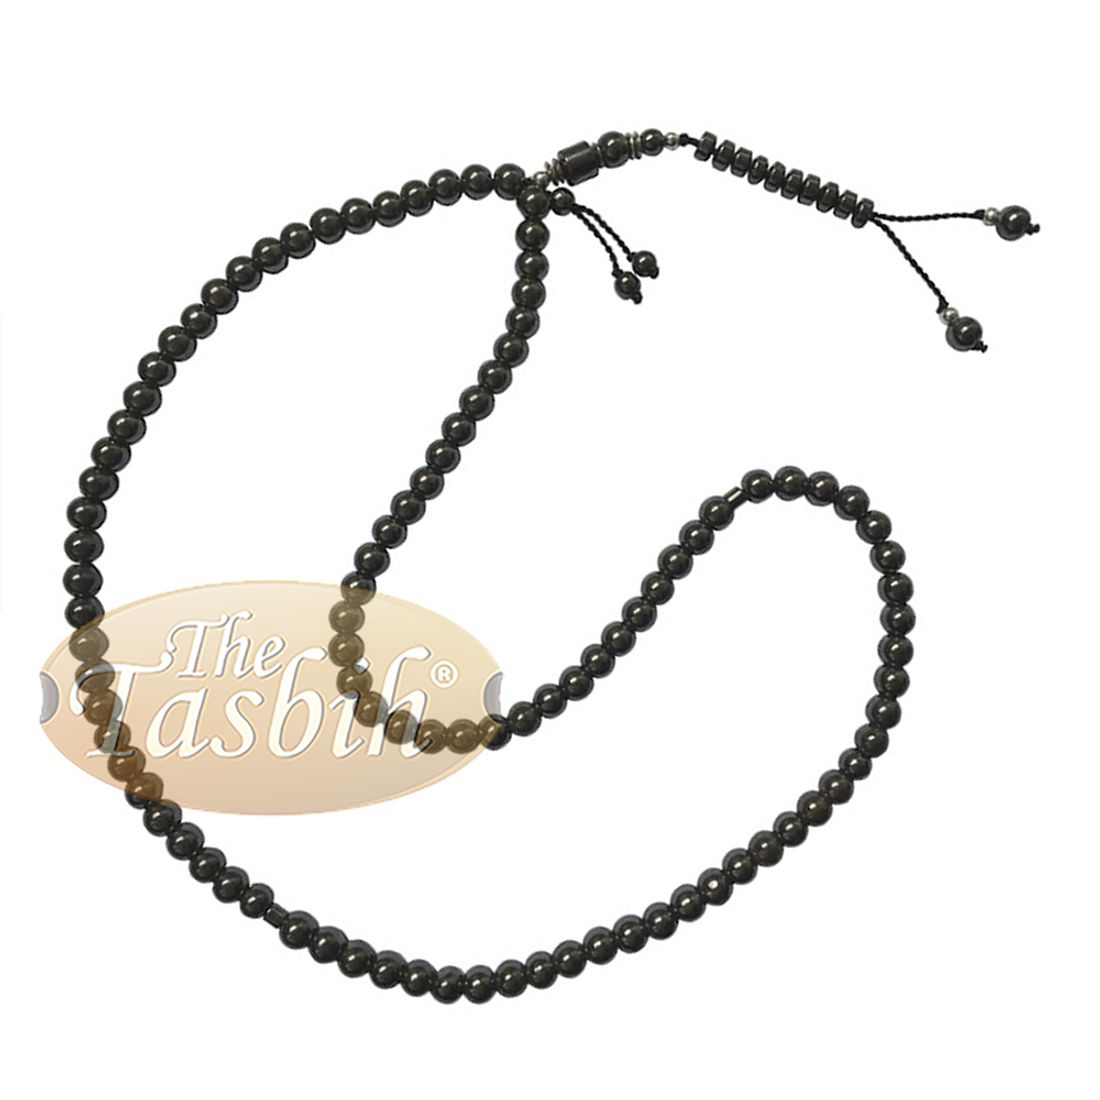 99-bead Tasbih Hematine Stone 8mm Bead with Place Marker